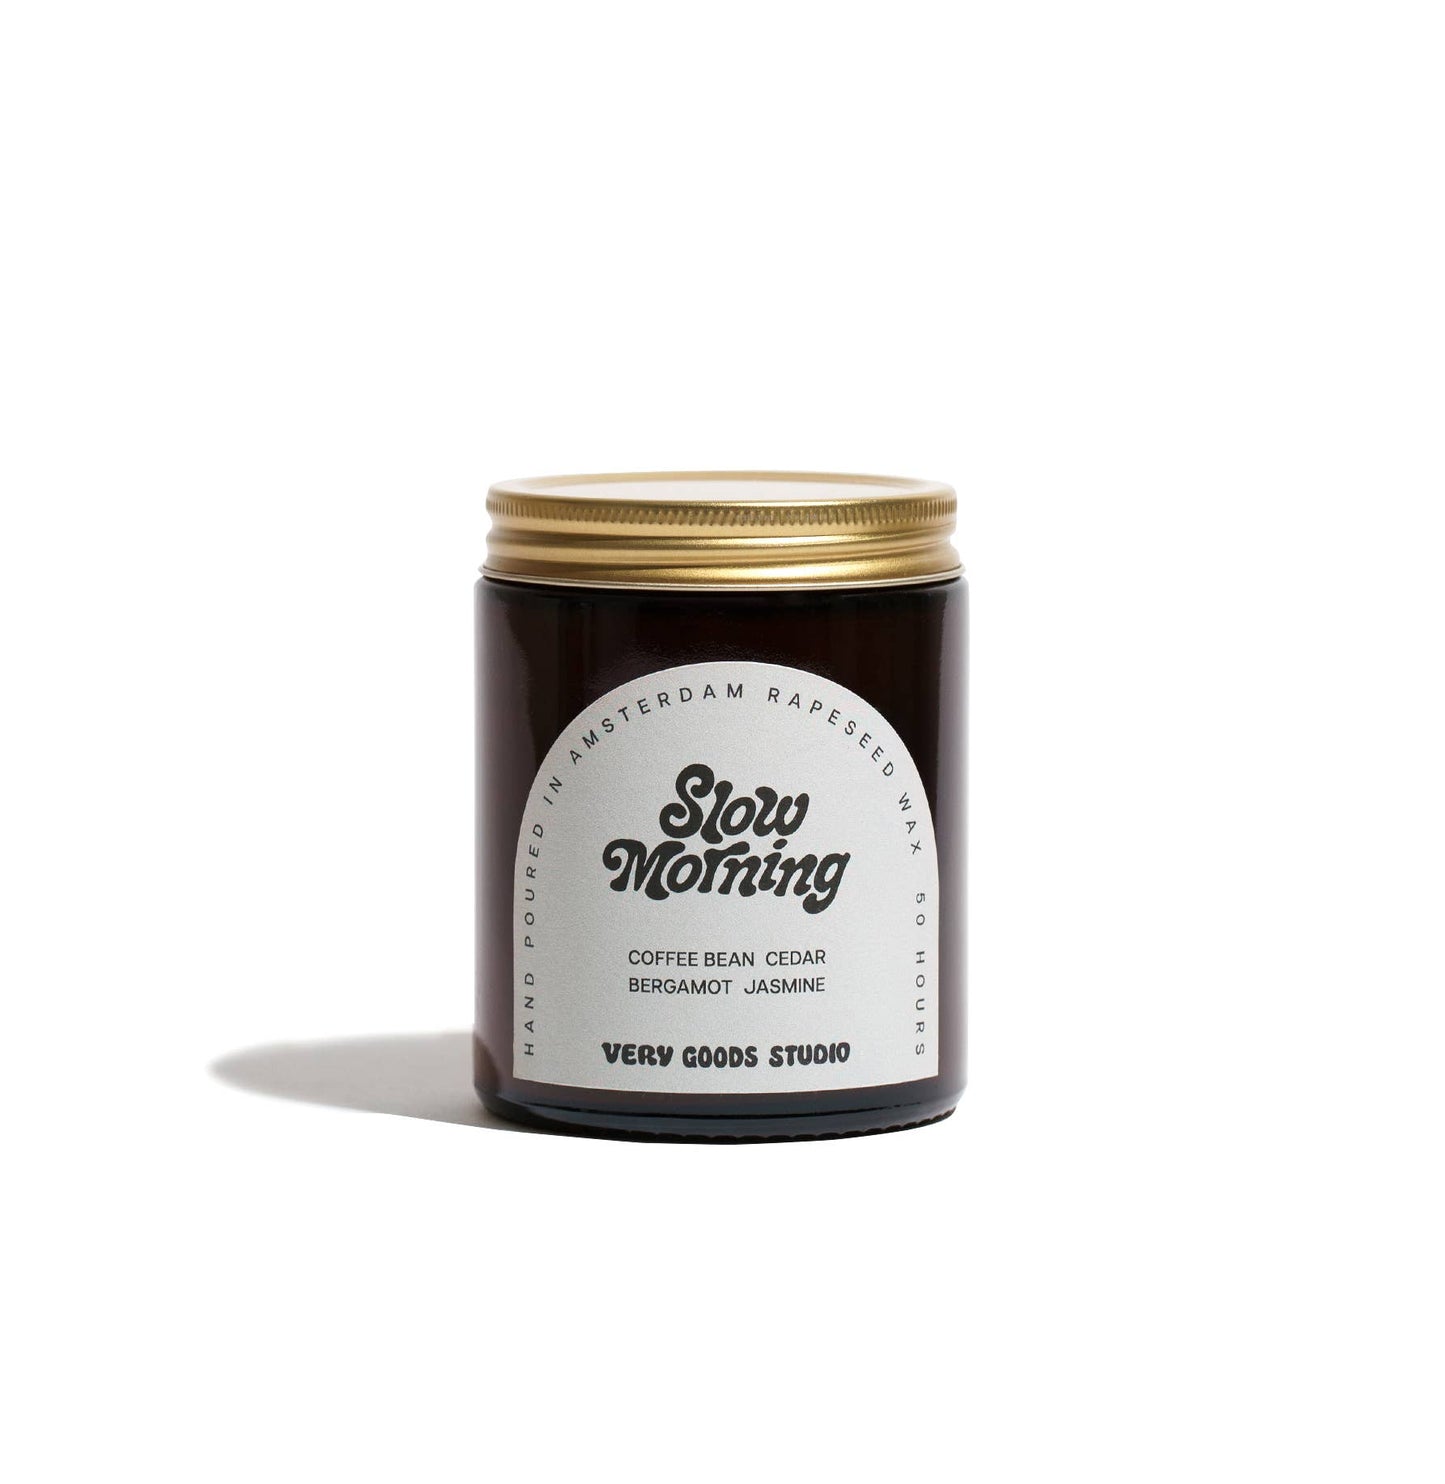 Very Goods Studio Slow Morning Scented Candle